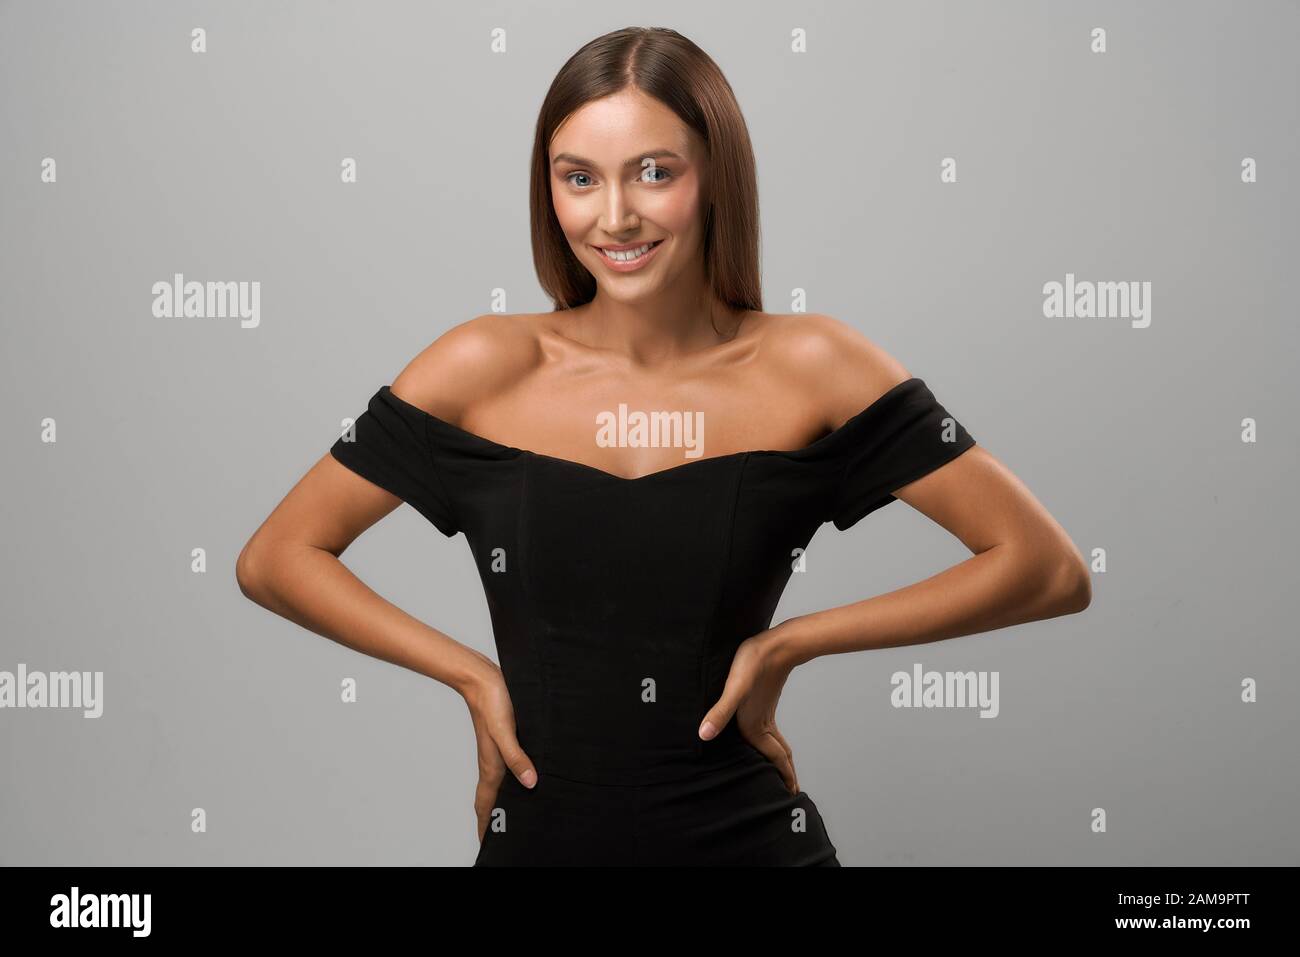 Front view of young attractive smiling girl with long brunette hair keeping hands on waist. Lady wearing black off shoulder top looking at camera on isolated grey background at studio. Stock Photo